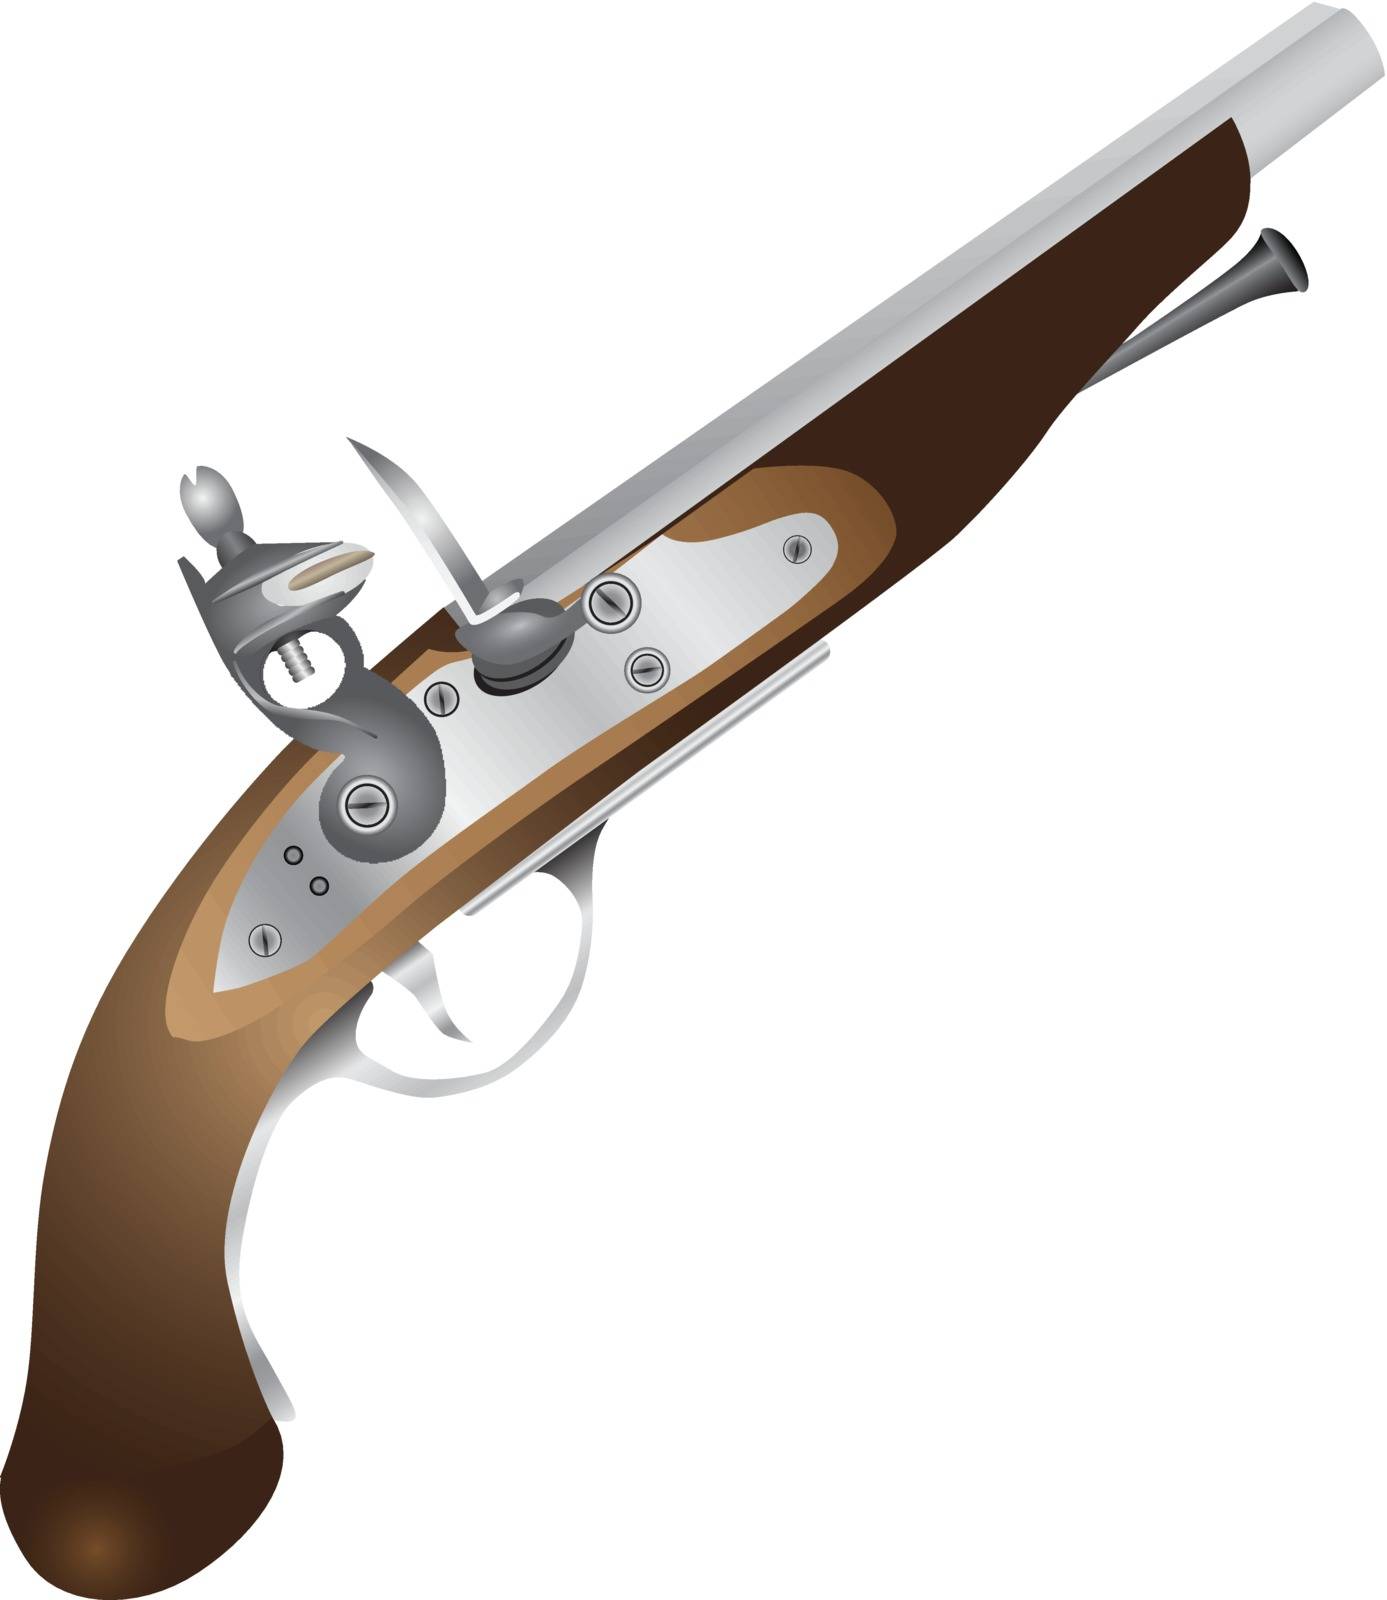 Old pistol used by pirates. Vector illustration.